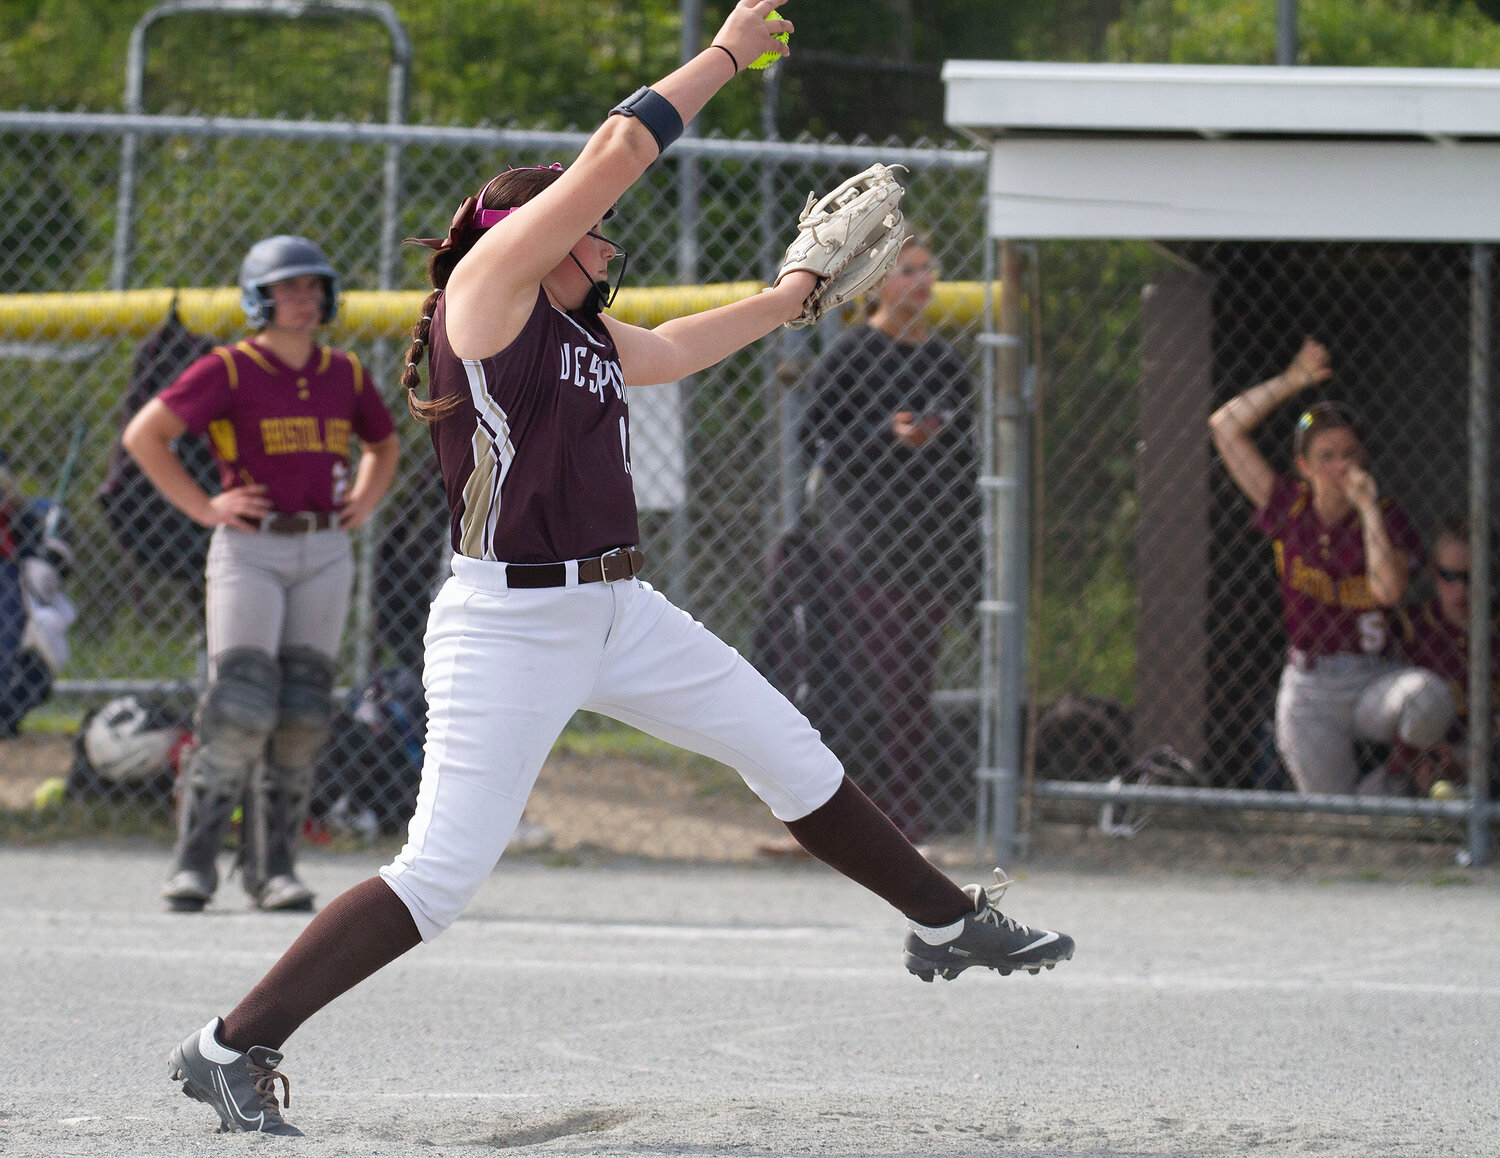 Mackenzy Ponte winds up to make a pitch during the Bristol Aggie game.